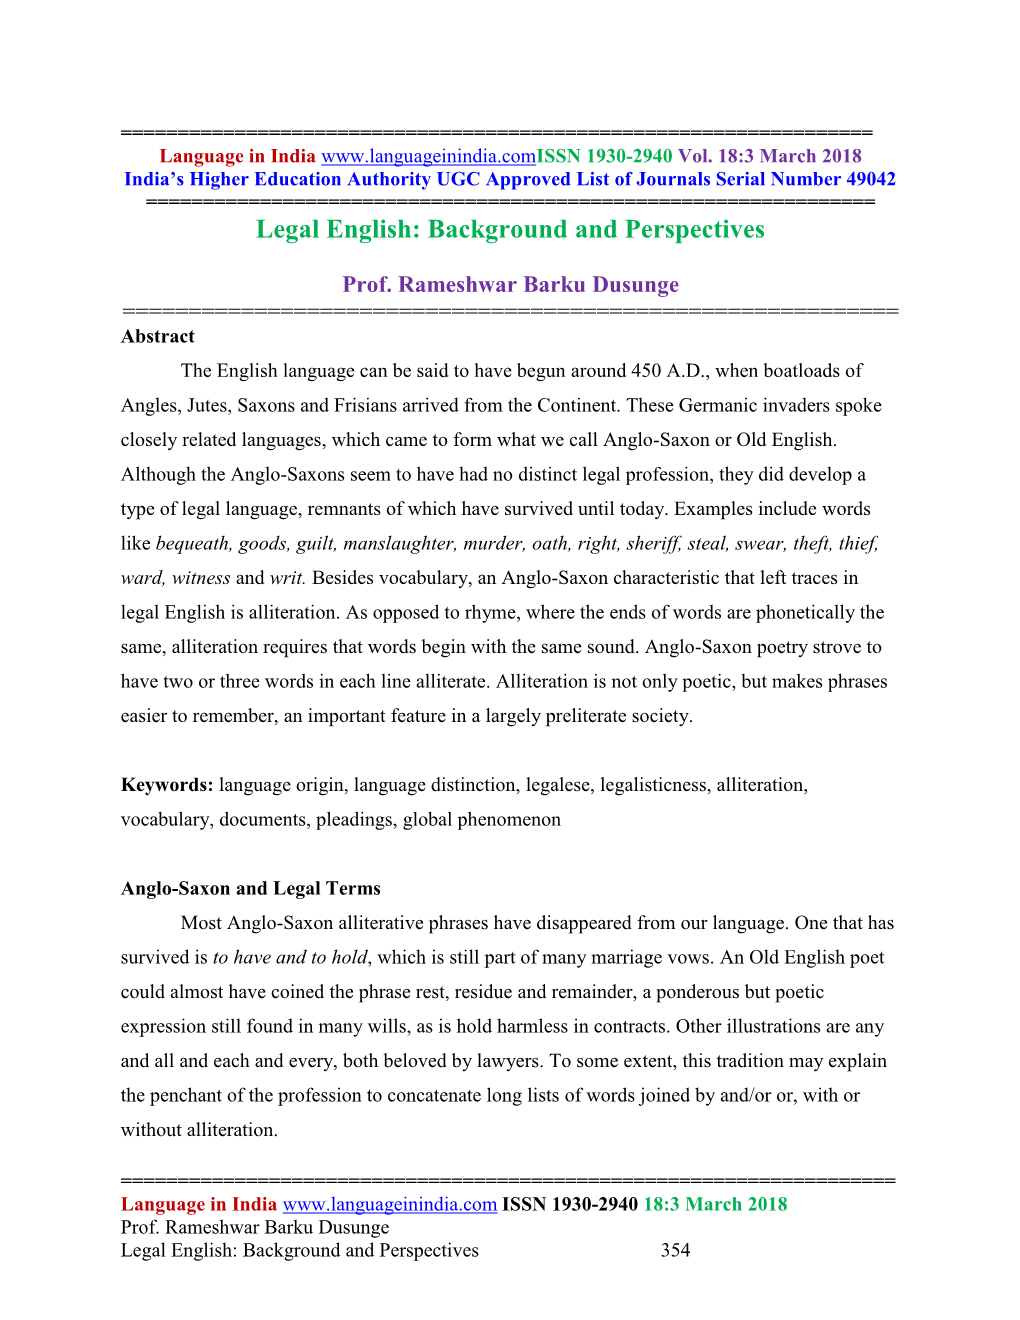 Legal English: Background and Perspectives